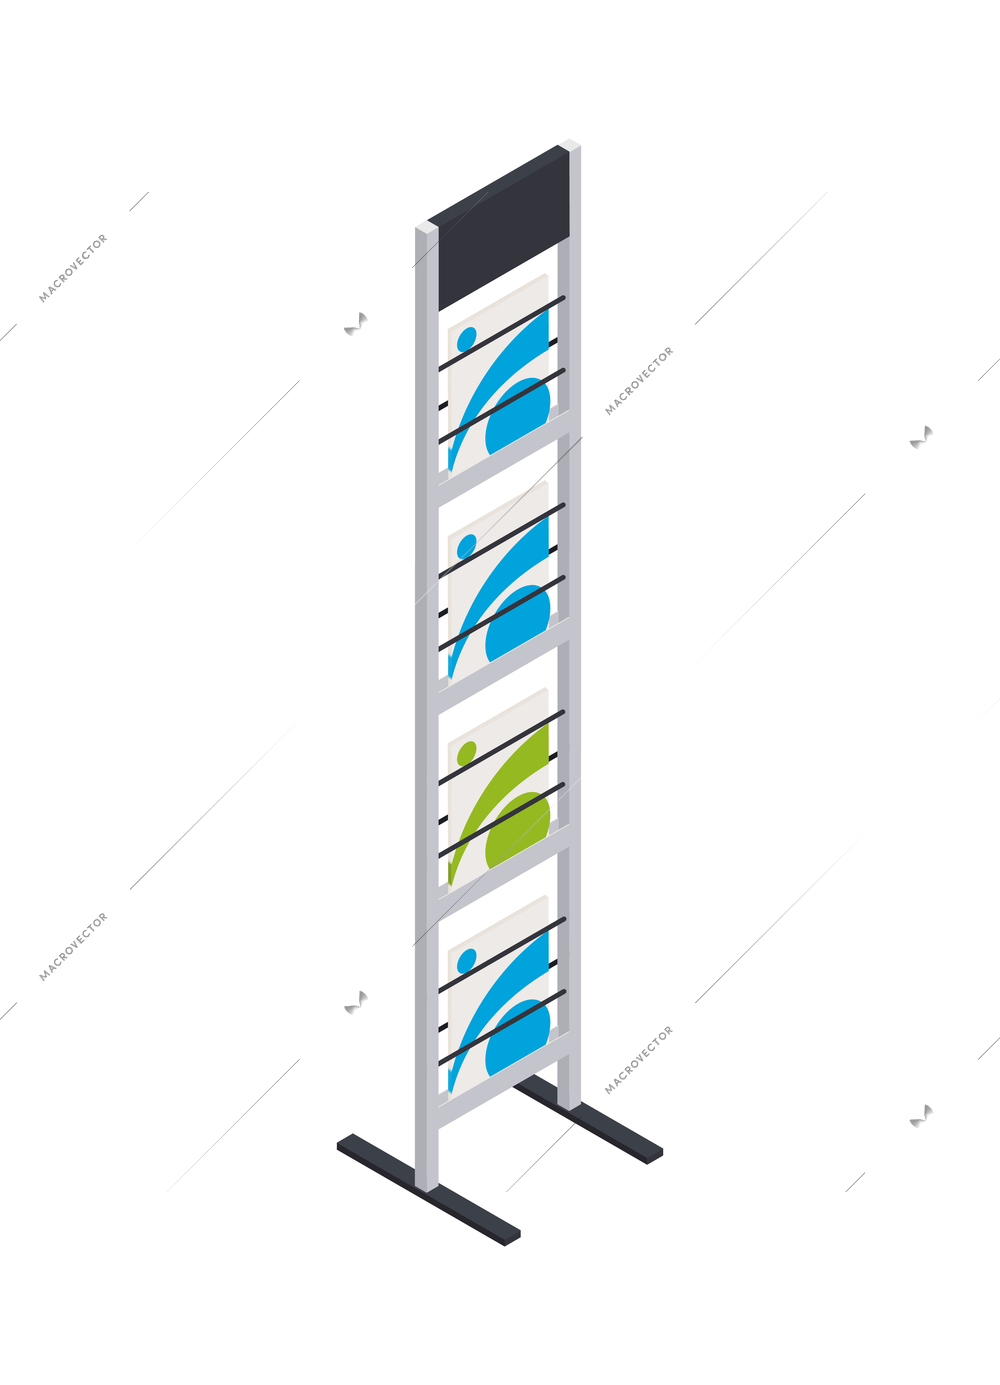 Exposition promotional rack with brochures or catalogues 3d isometric vector illustration